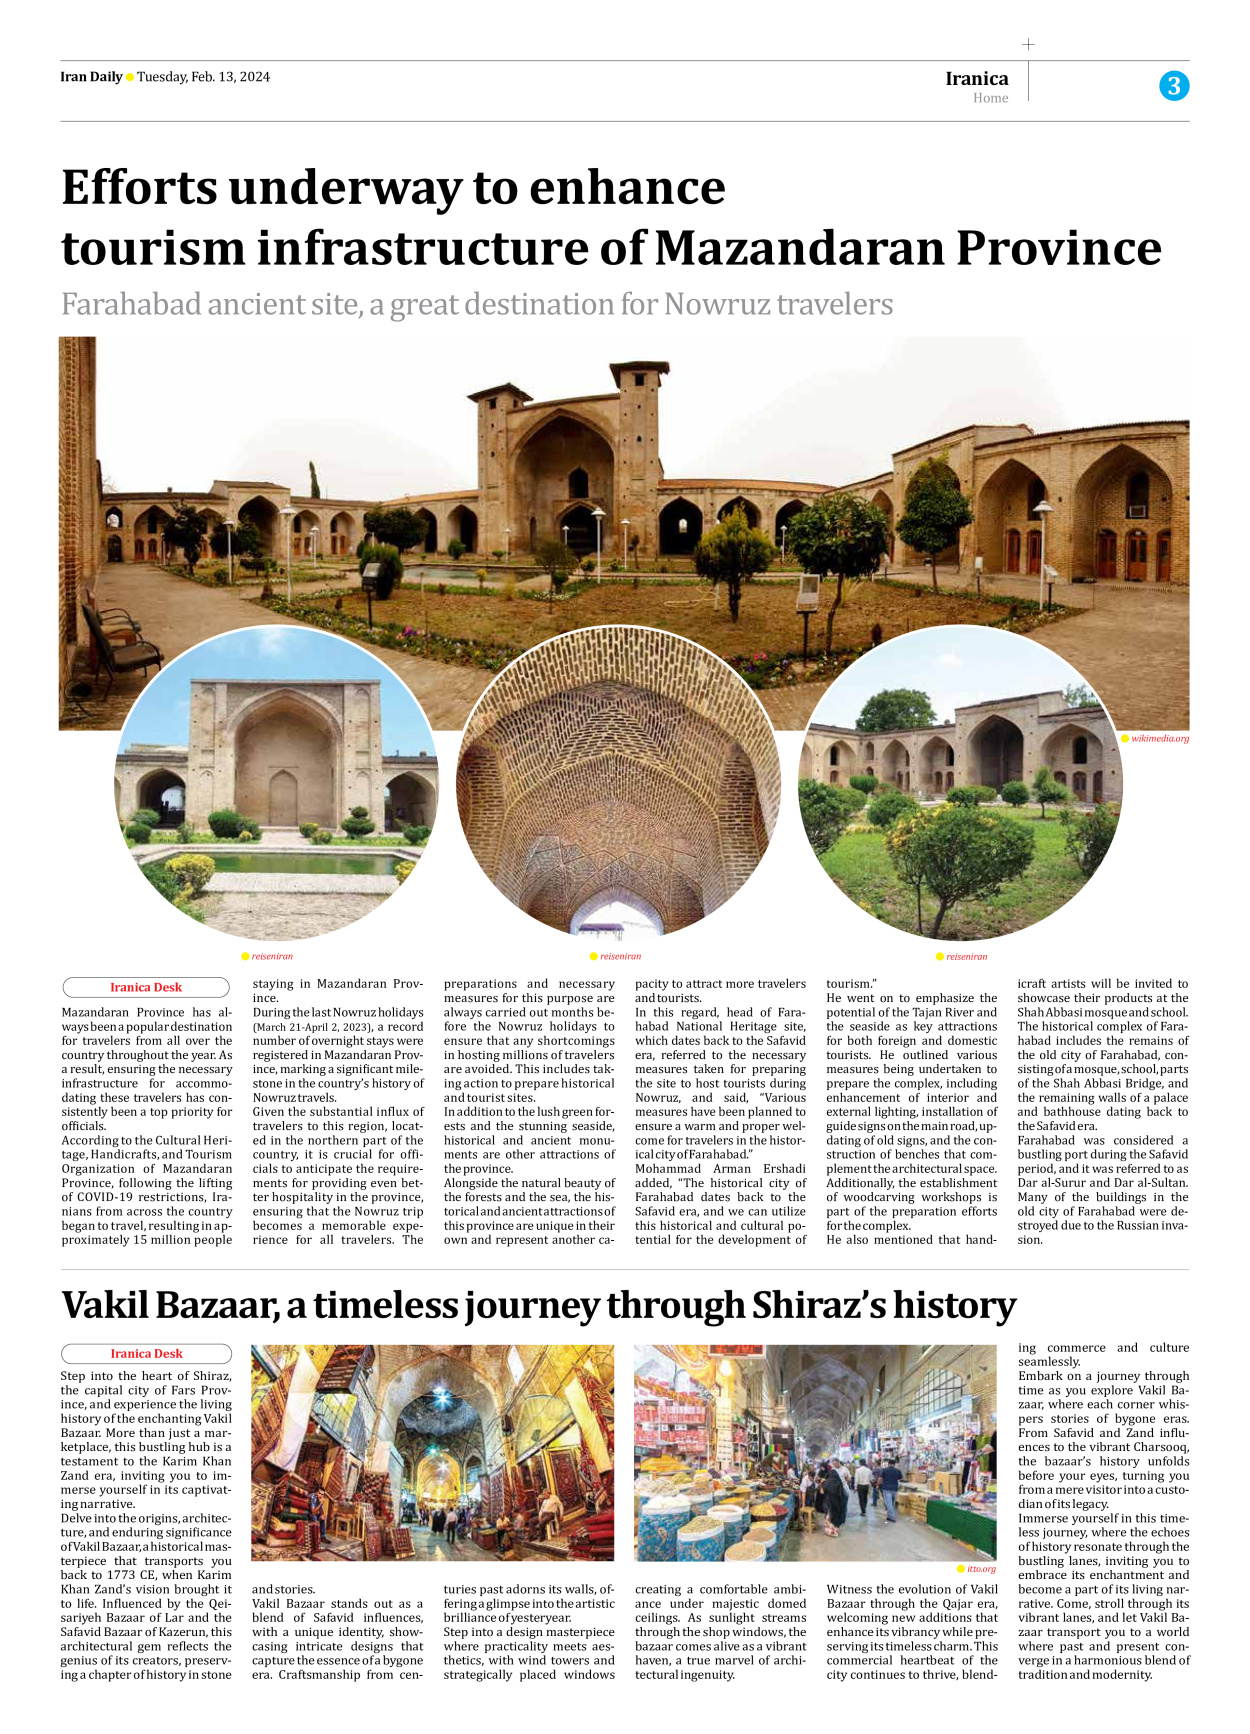 Iran Daily - Number Seven Thousand Five Hundred and Six - 13 February 2024 - Page 3